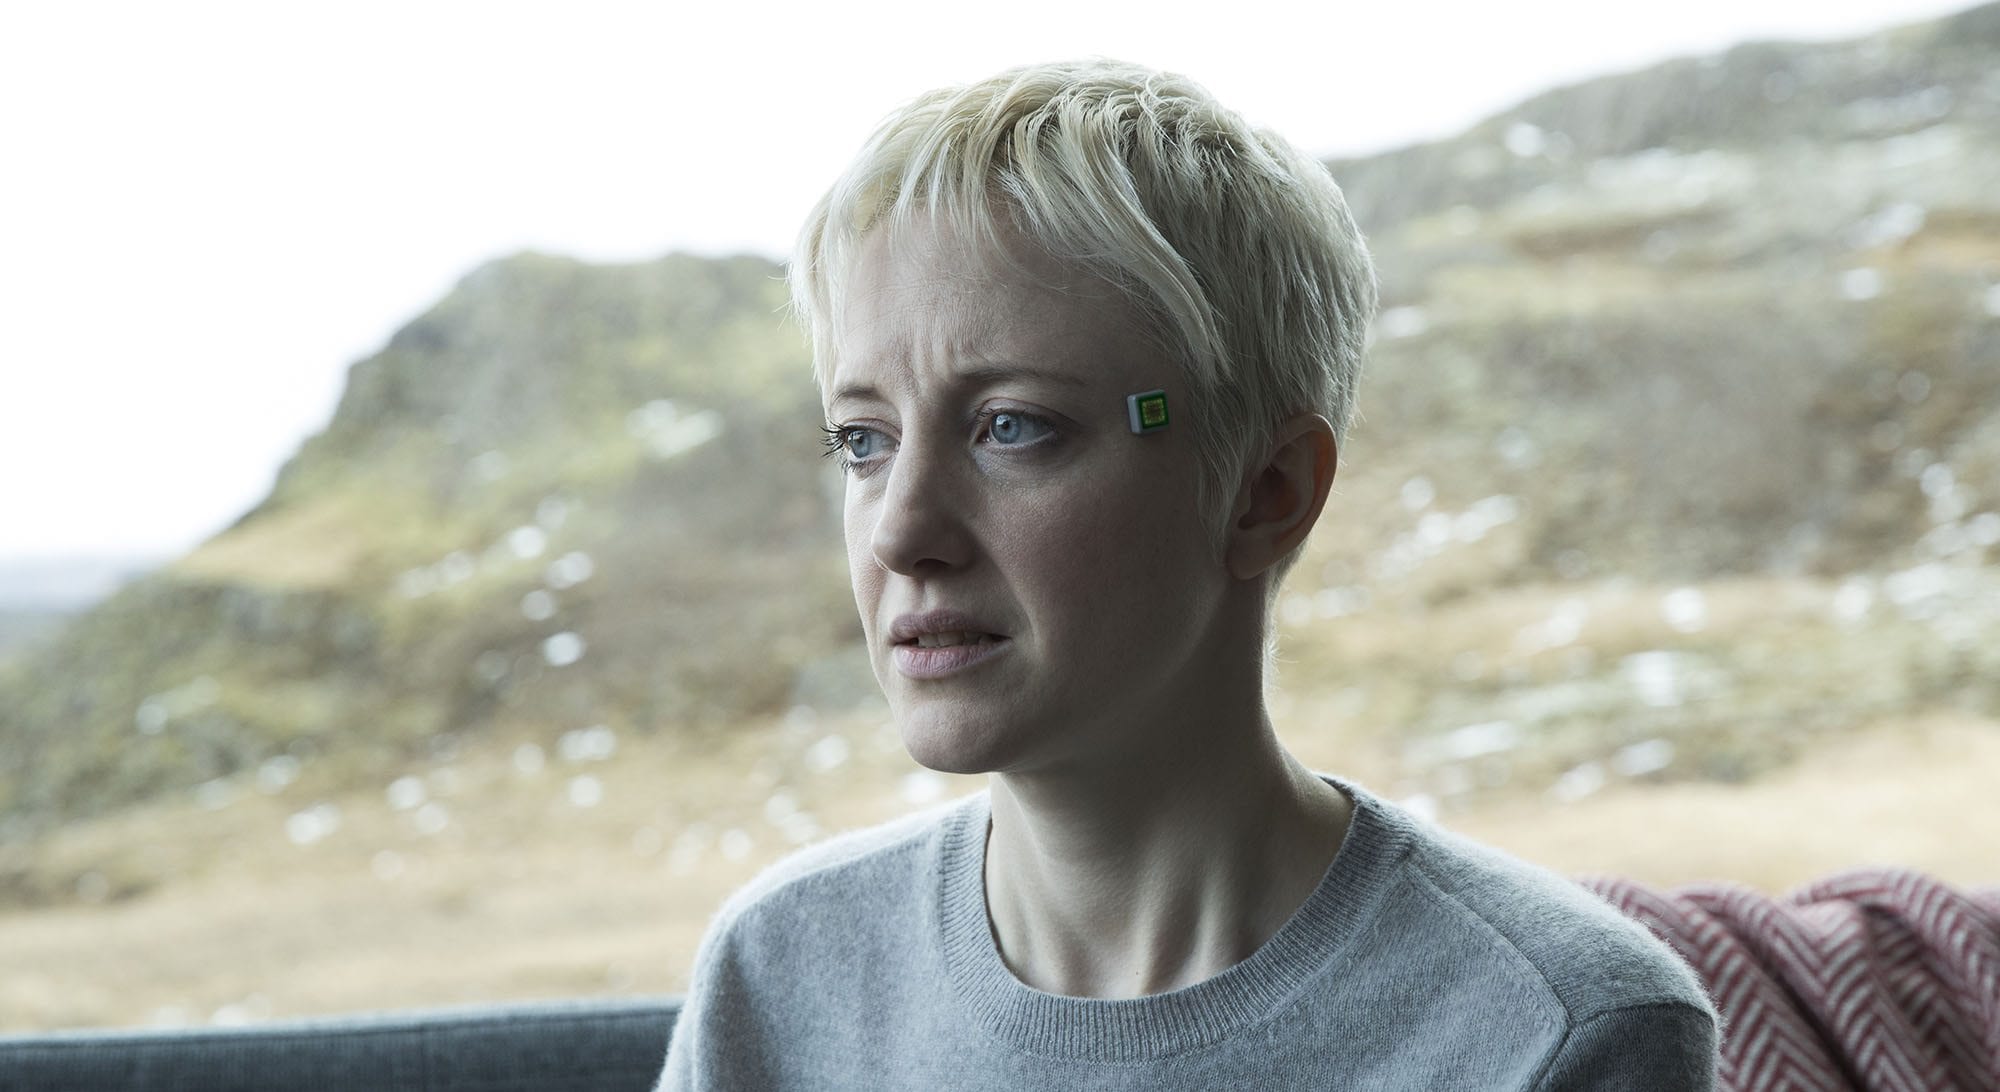 An unnerving story, 'Black Mirror' S4E1 “Crocodile” puts Andrea Riseborough at the center of a tale that weaves through time and memory.